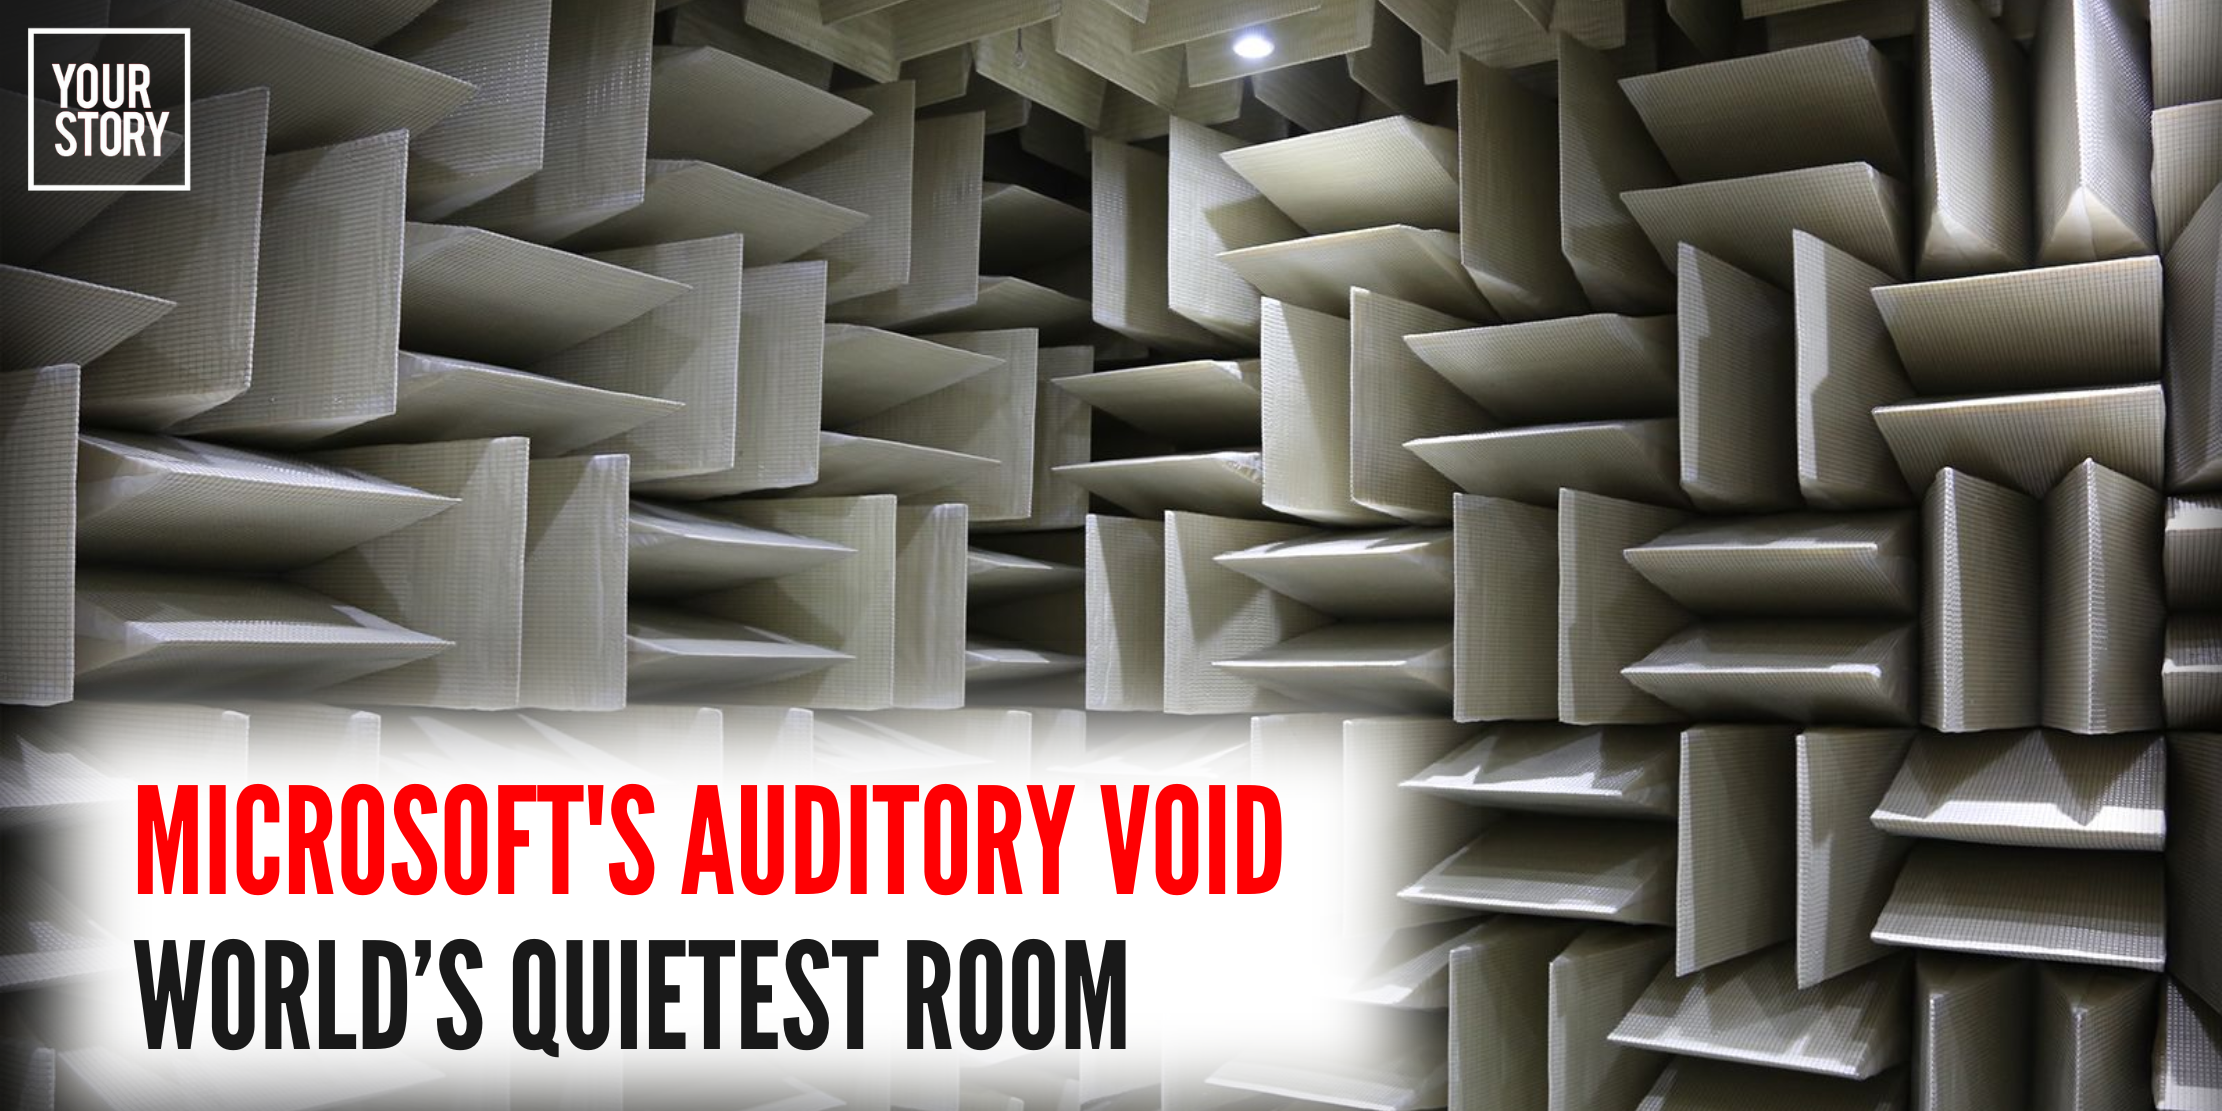 ⁠⁠The Room So Quiet It'll Drive You Crazy: Microsoft's Auditory Void